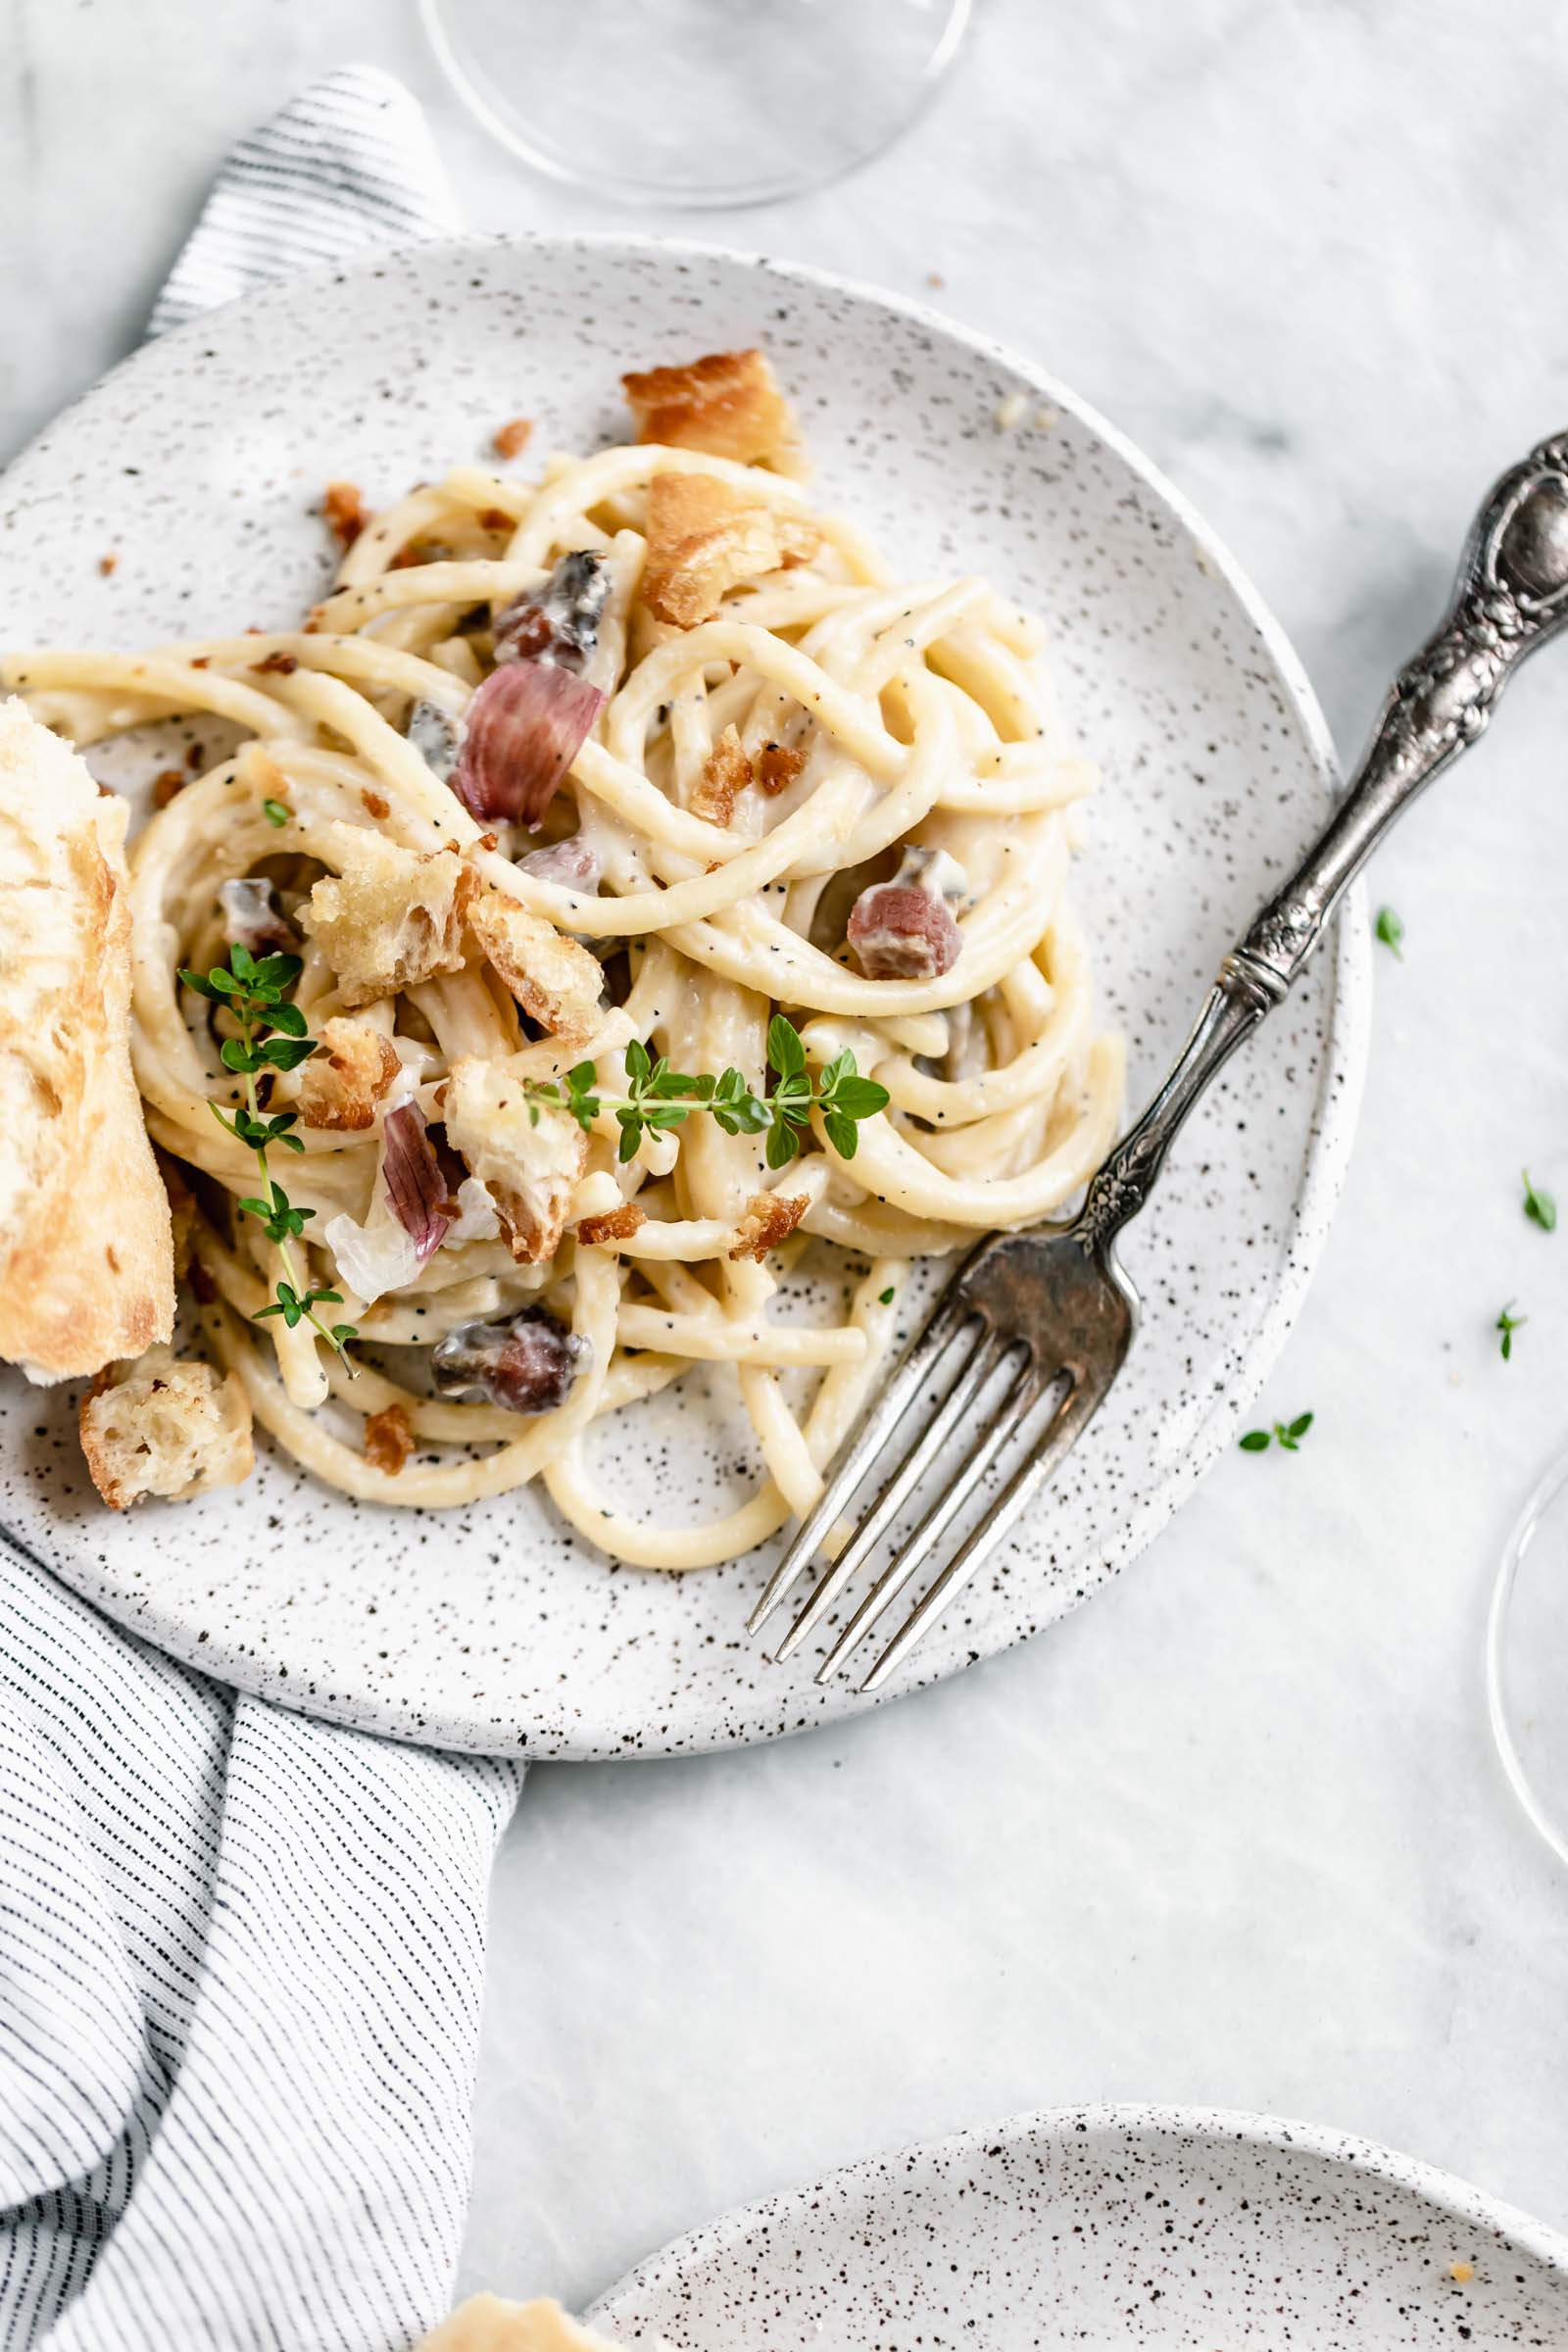 A creamy Roman classic made with bucatini, guanciale, parmigiano, and egg yolks, this Date Night Pasta Carbonara is perfectly portioned for two!